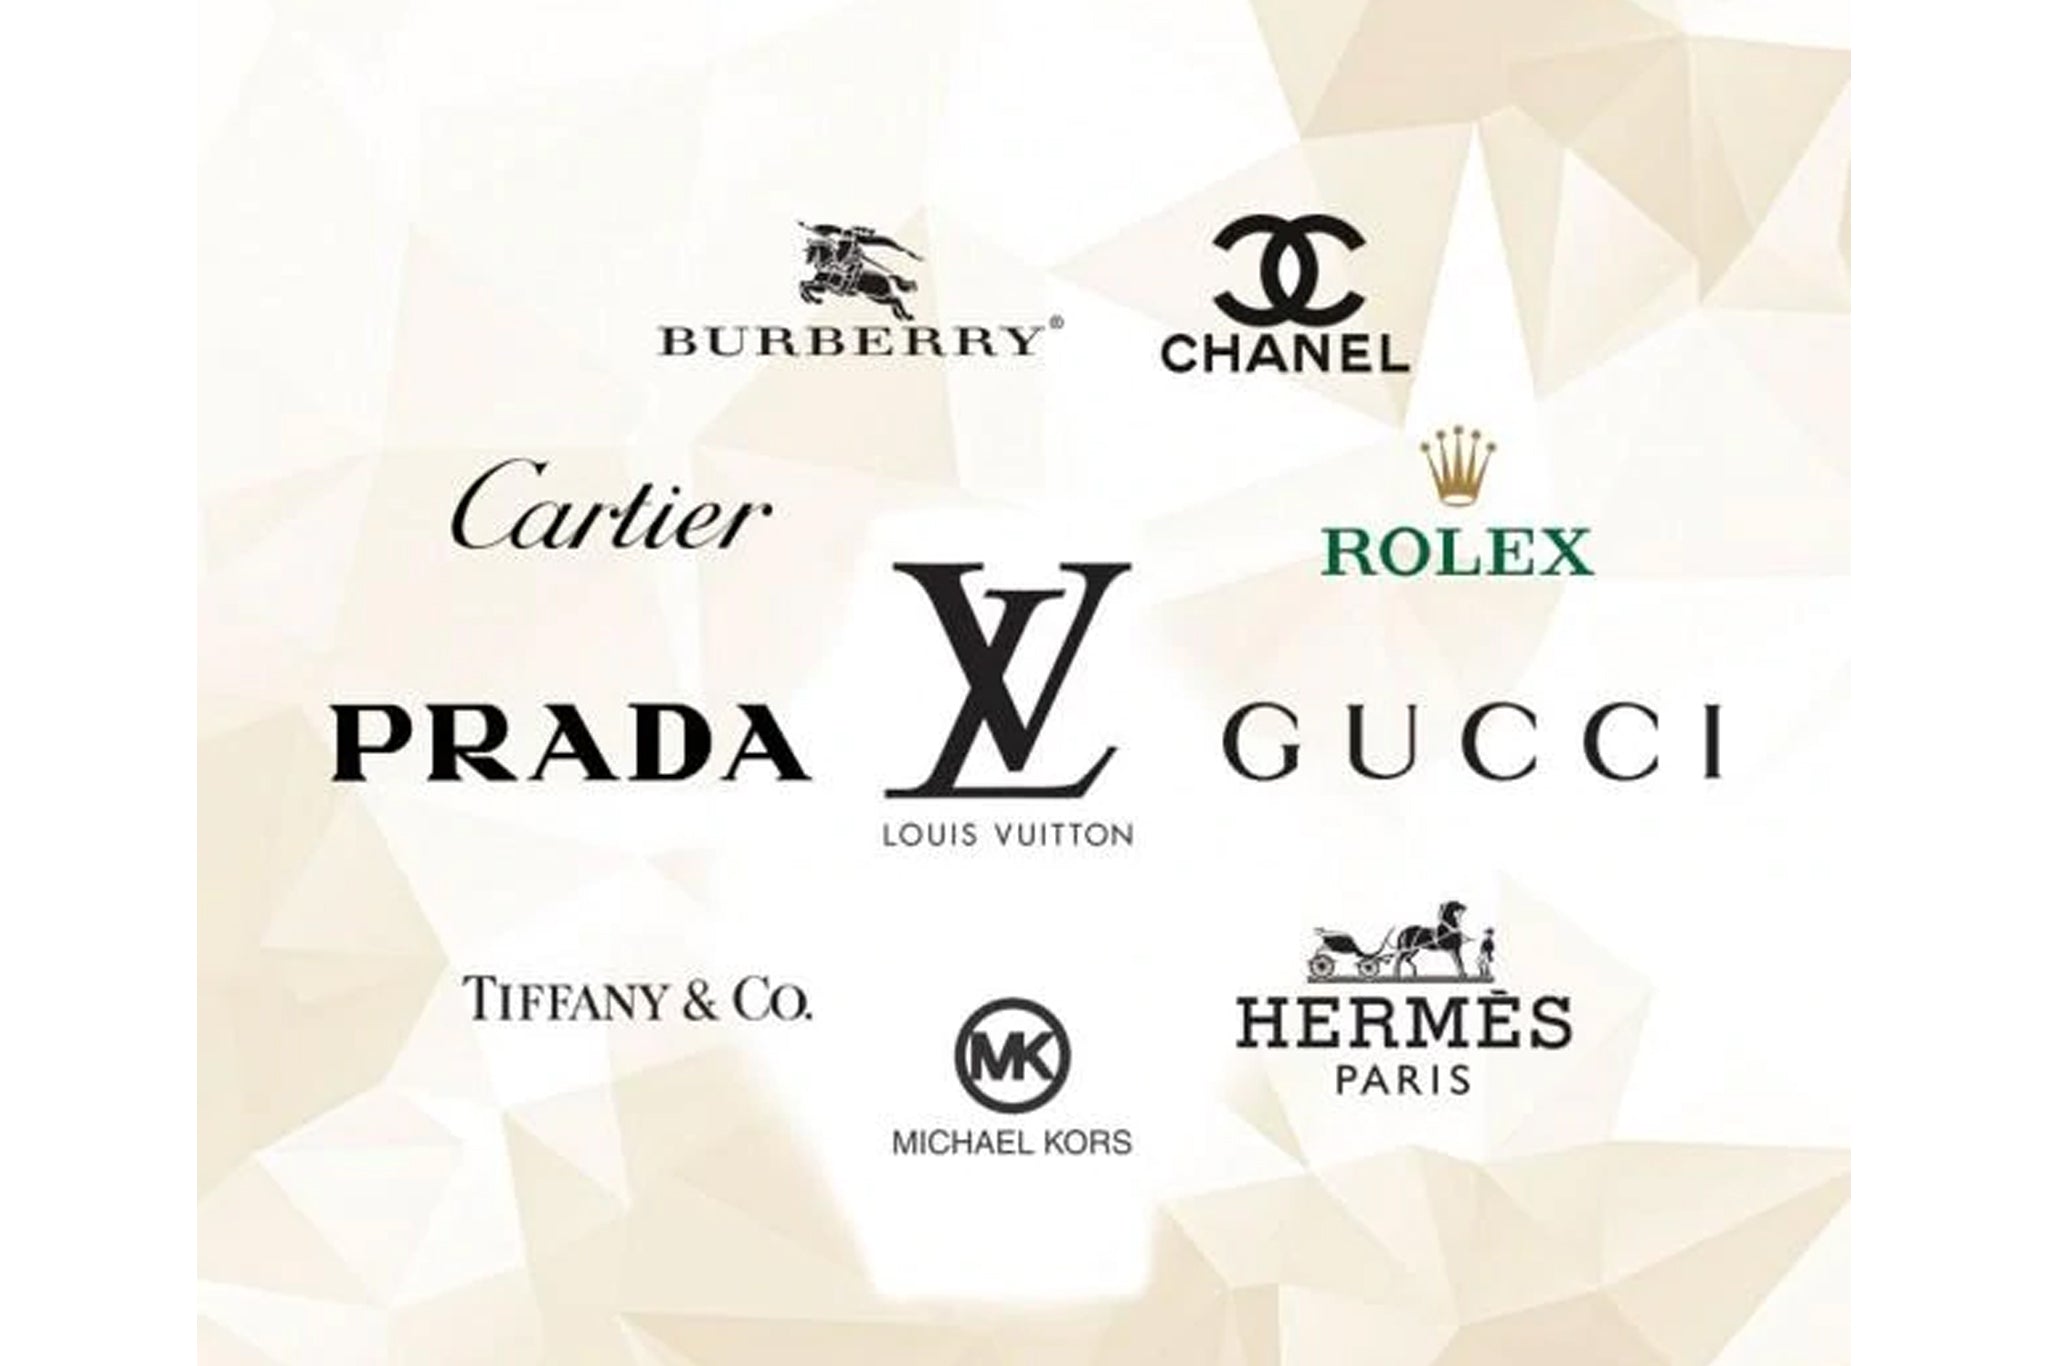 Louis Vuitton, Chanel, Rolex, Gucci and More; A look at World's Most  Valuable Luxury Brands - News18